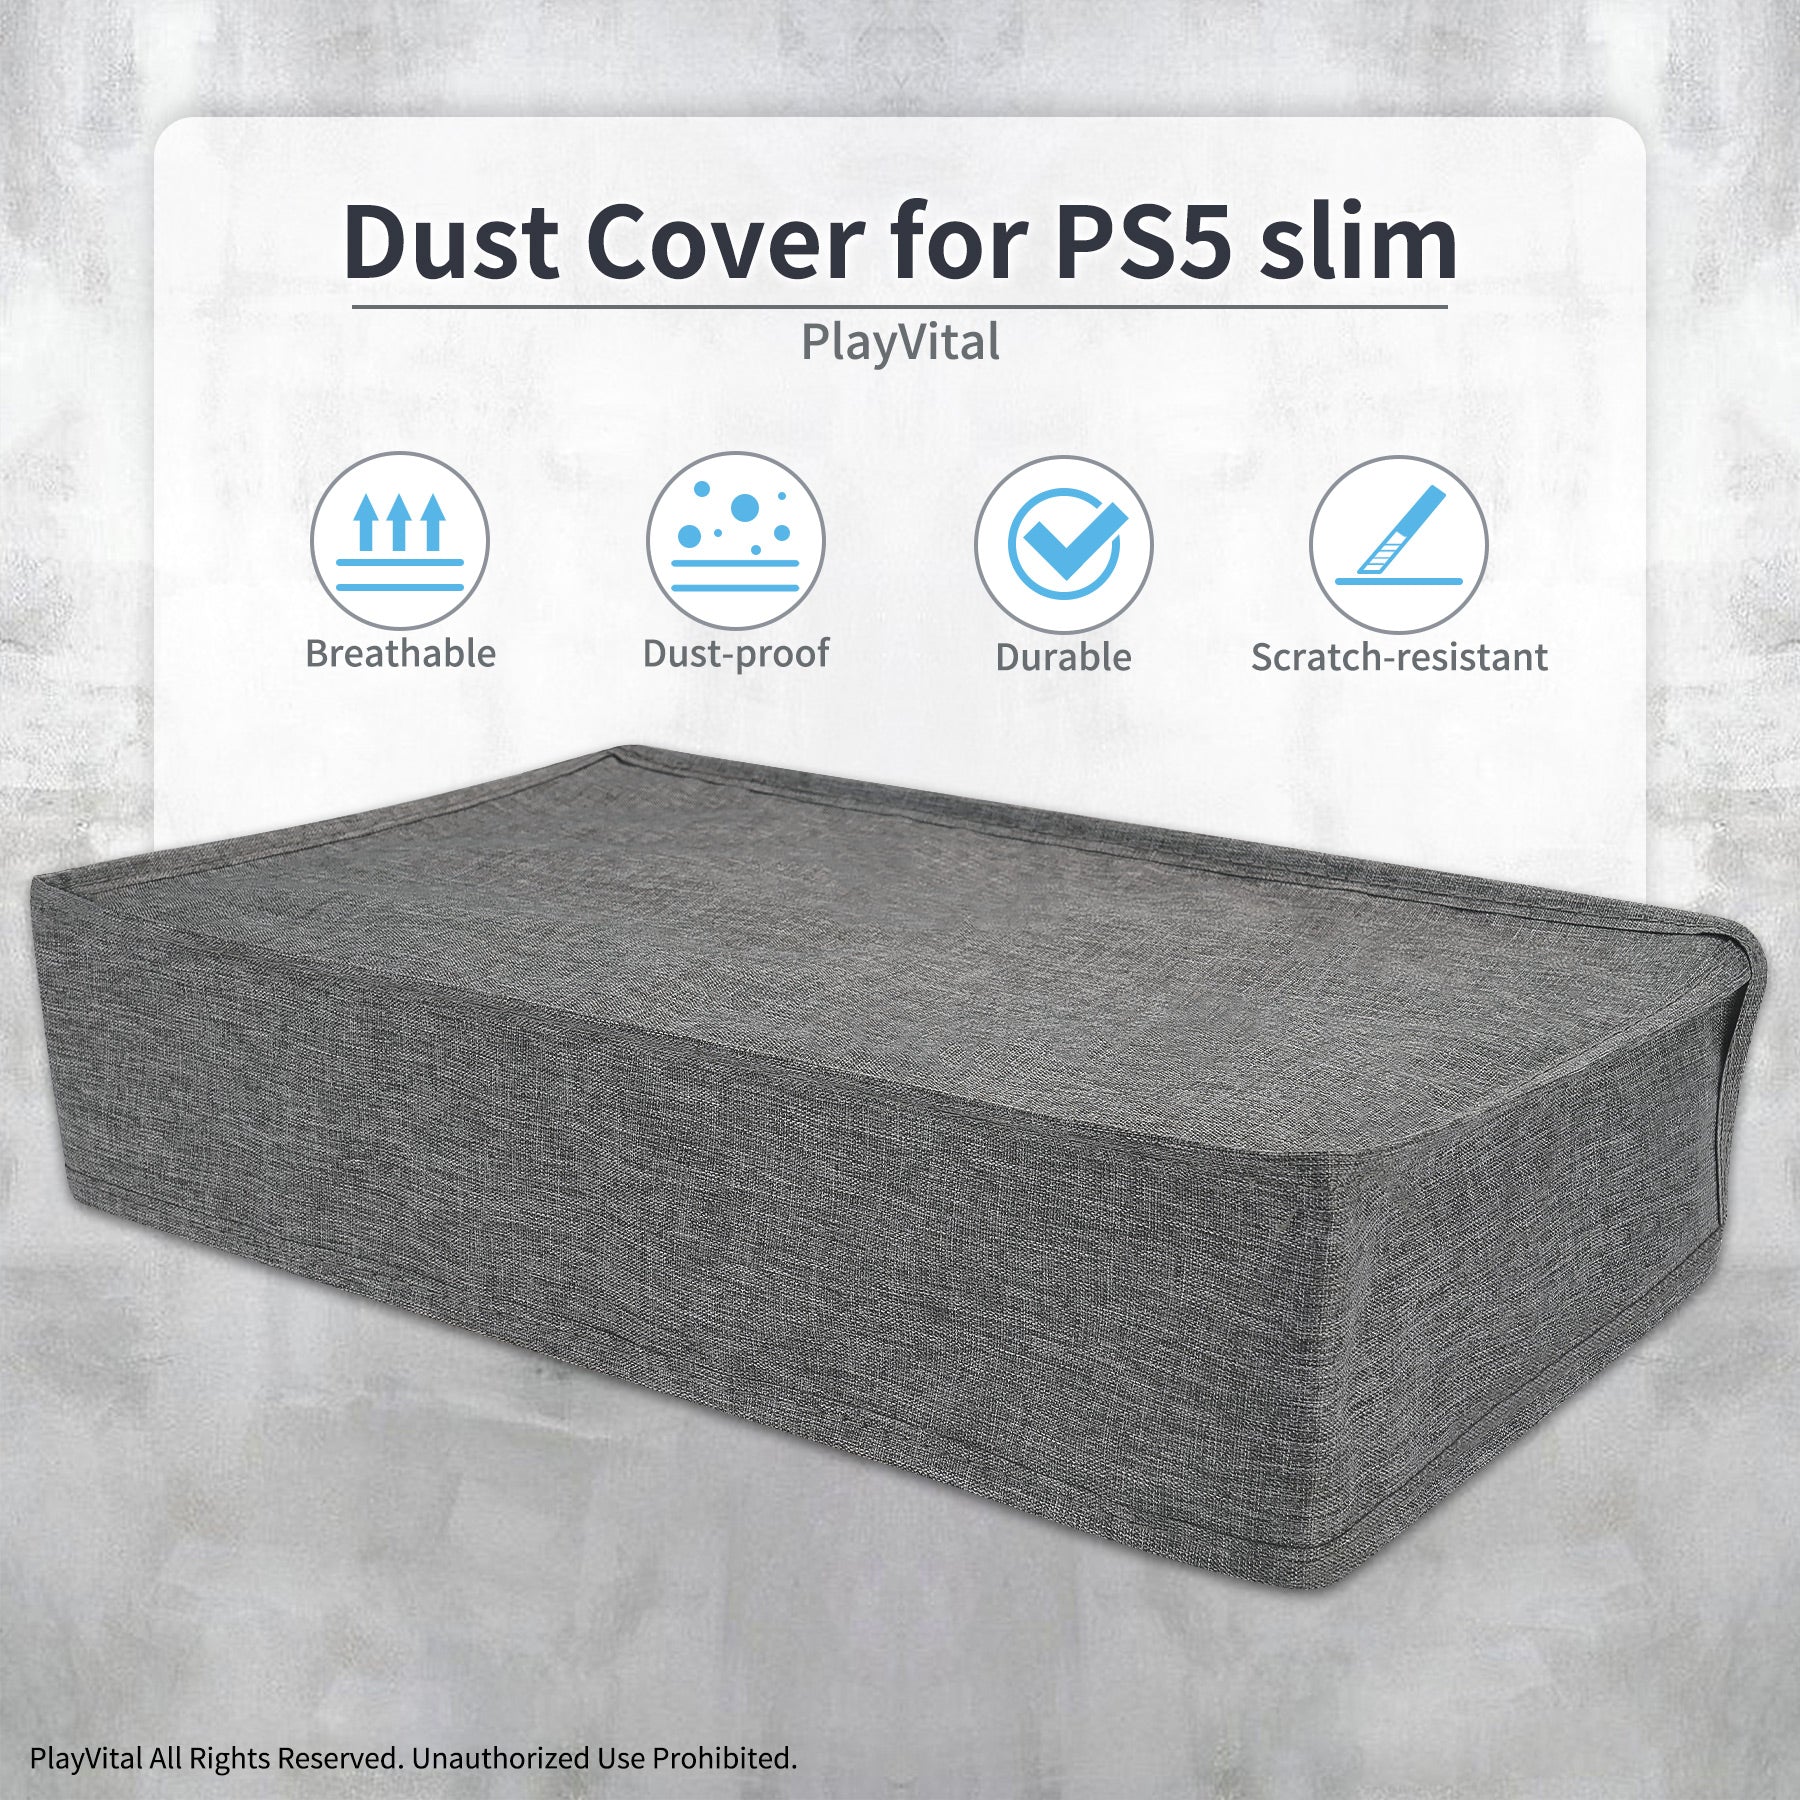 PlayVital Horizontal Dust Cover for ps5 Slim Digital Edition(The New Smaller Design), Gray Dust Proof Protector Waterproof Cover Sleeve for ps5 Slim Console - RTKPFM002 PlayVital